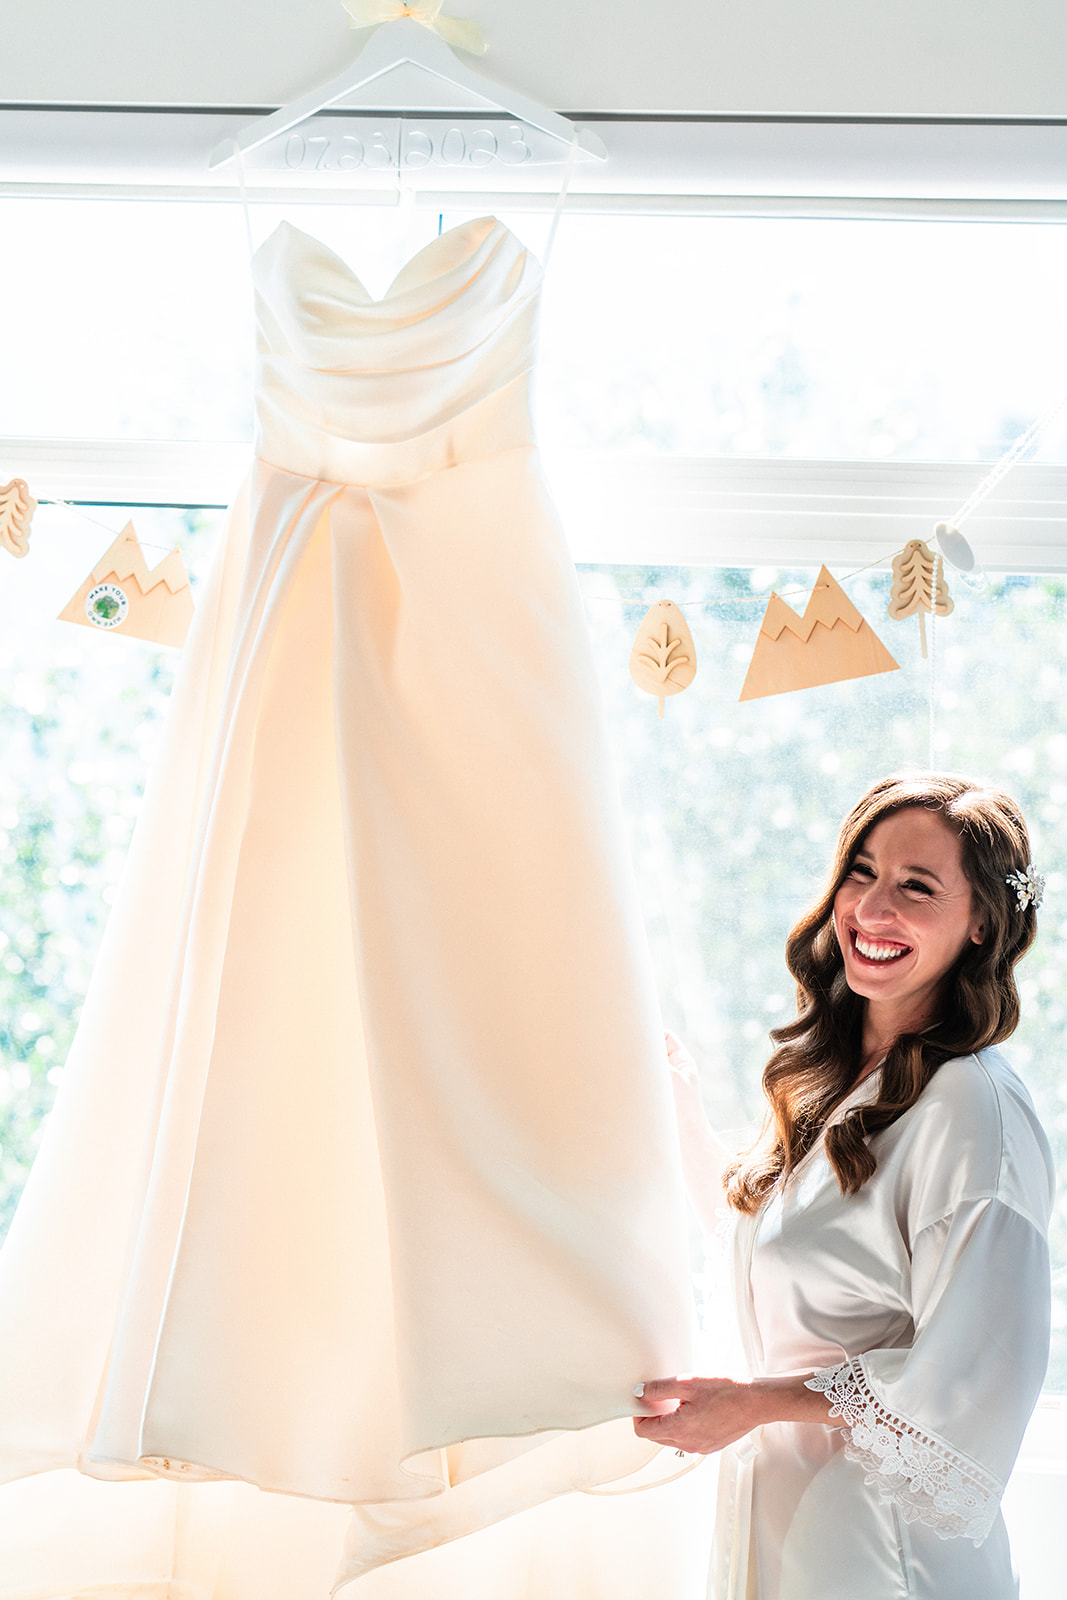 Bride smiling standing next to her strapless wedding dress